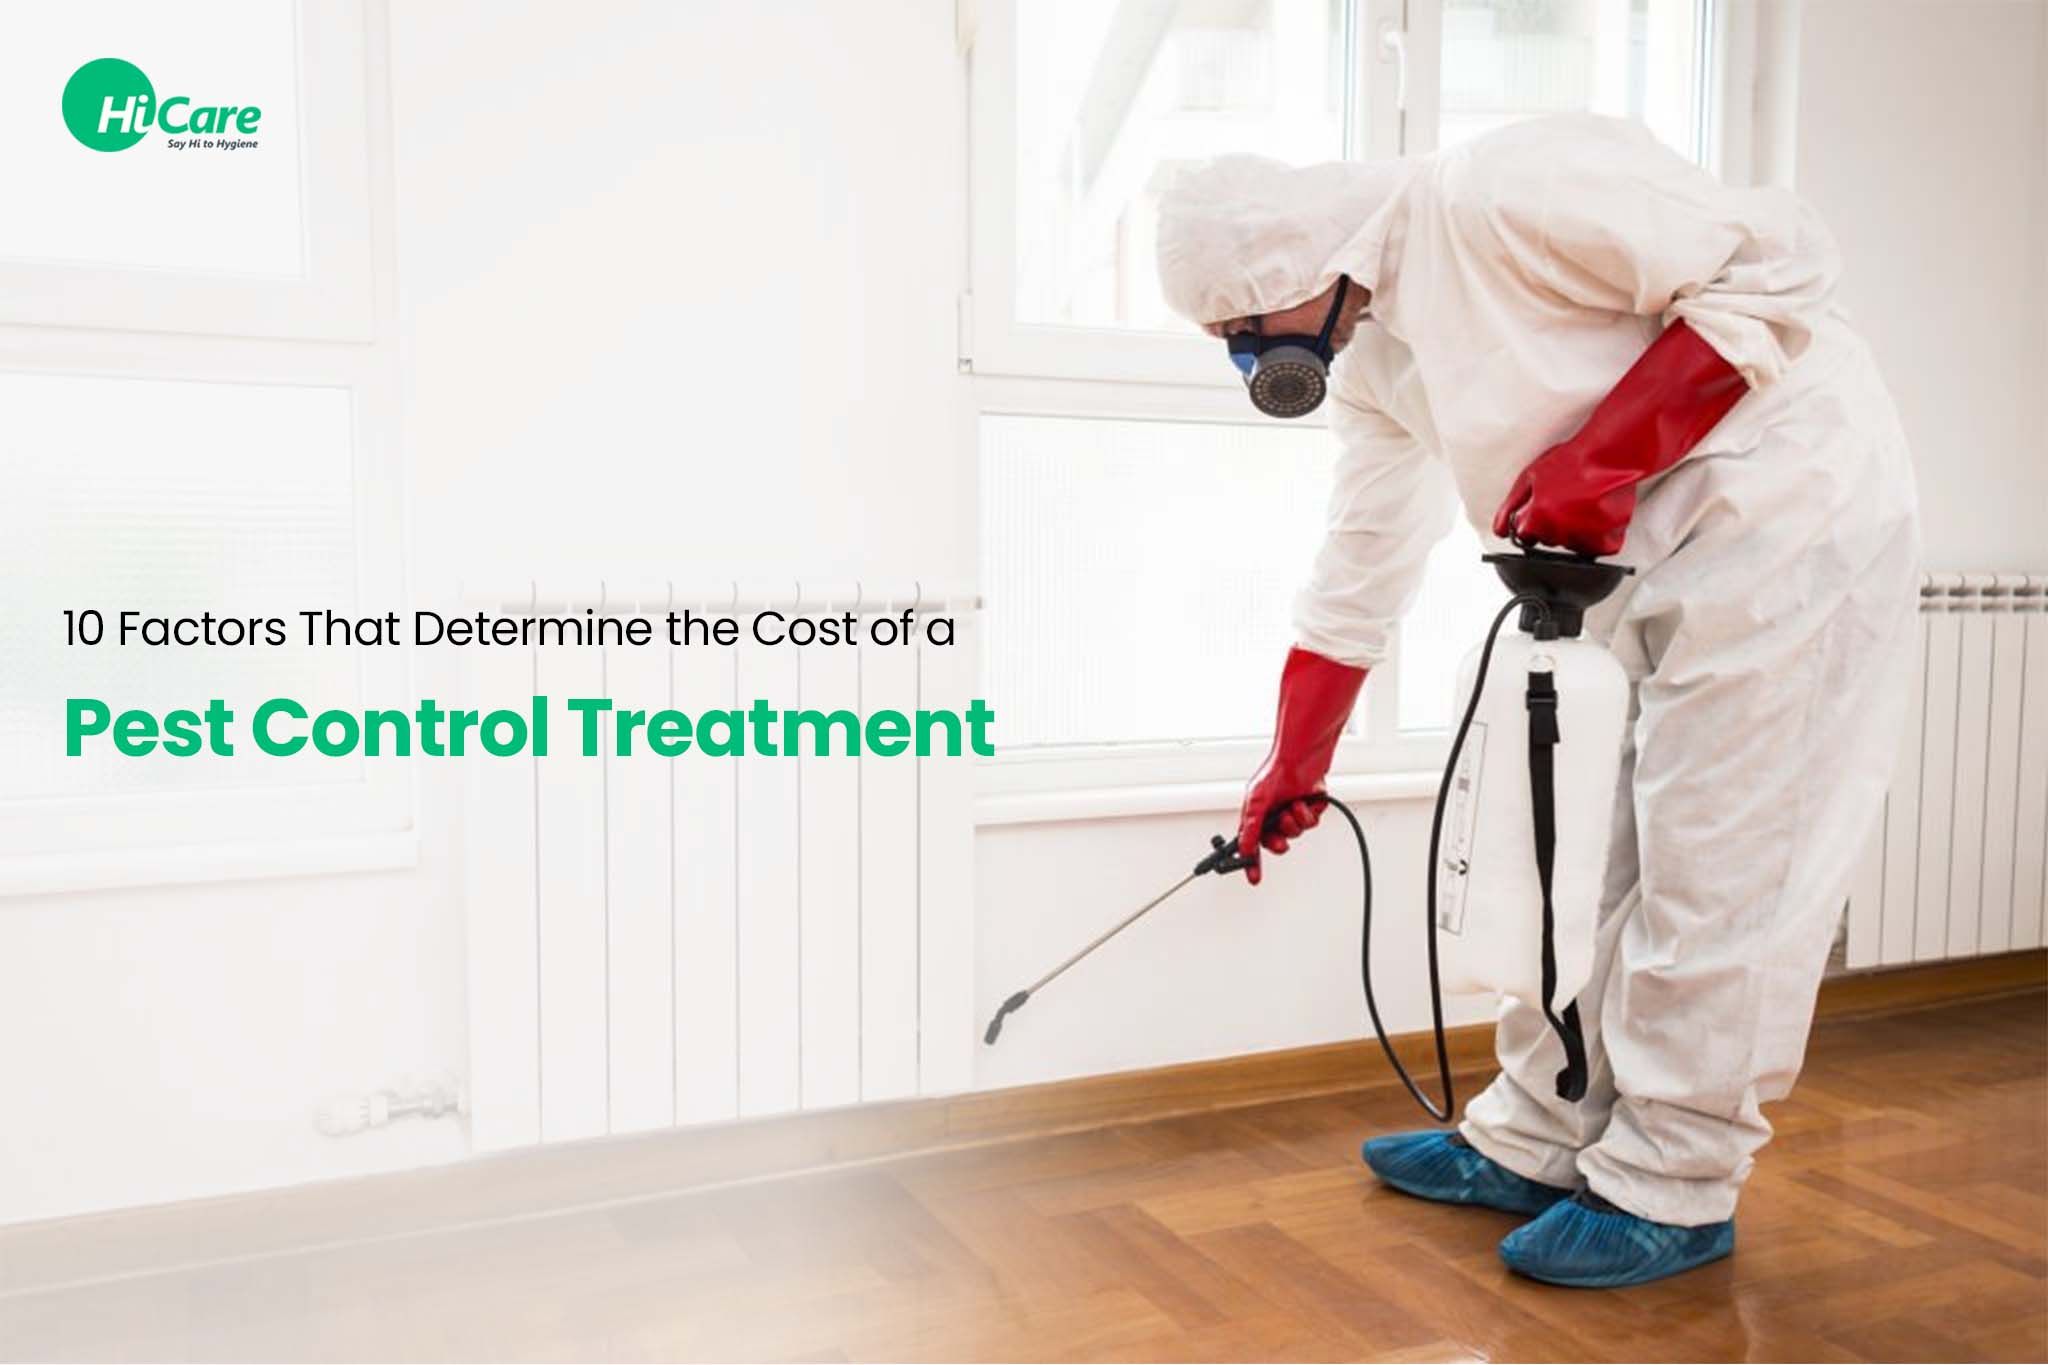 10 Factors That Determine the Cost of a Pest Control Treatment